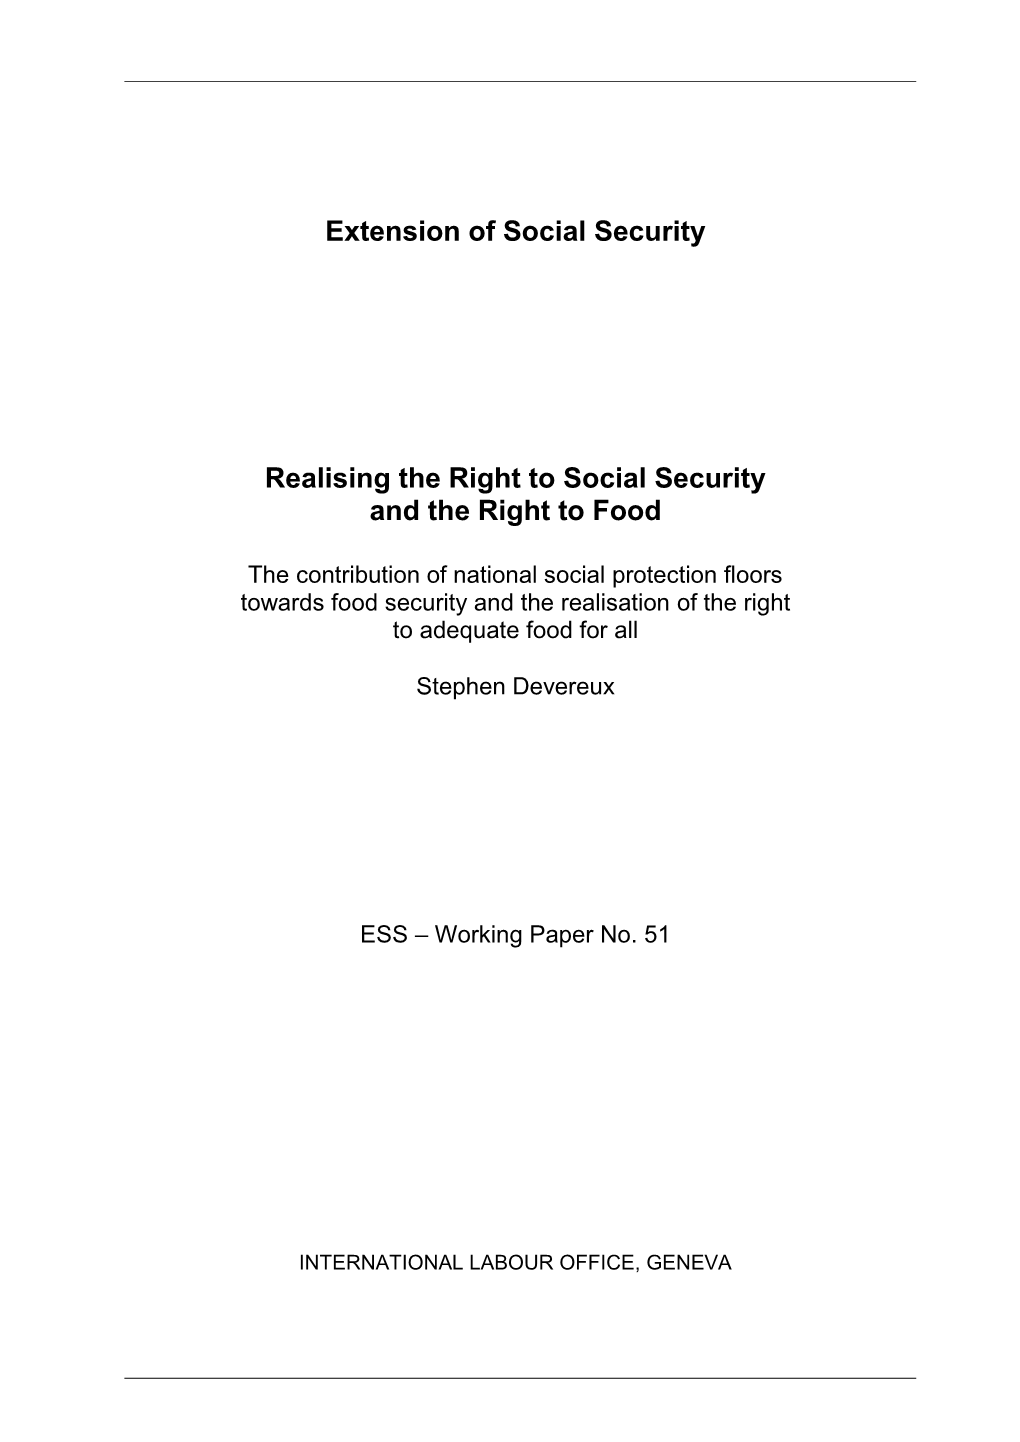 Extension of Social Security Realising the Right to Social Security and the Right to Food